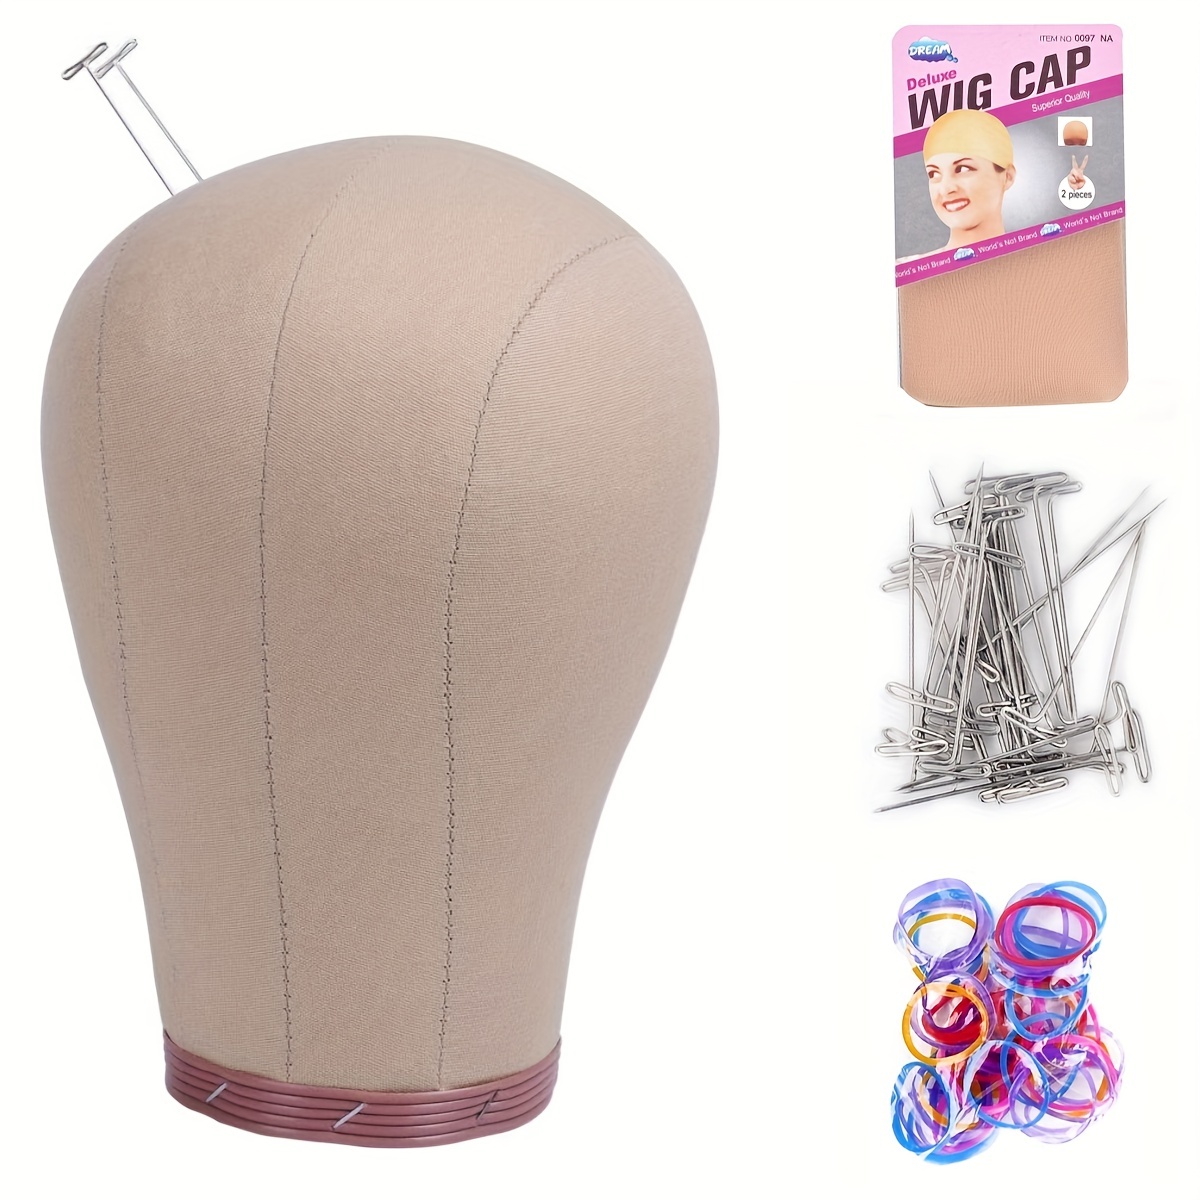 55.88/58.42 Cm Wig Head,Wig Stand Tripod With Head,Canvas Wig Head Stand  With Mannequin Head For Wigs,Manikin Head Block Set For Wigs Making Display  With Wig Caps,T Pins Set,Bristle Brush